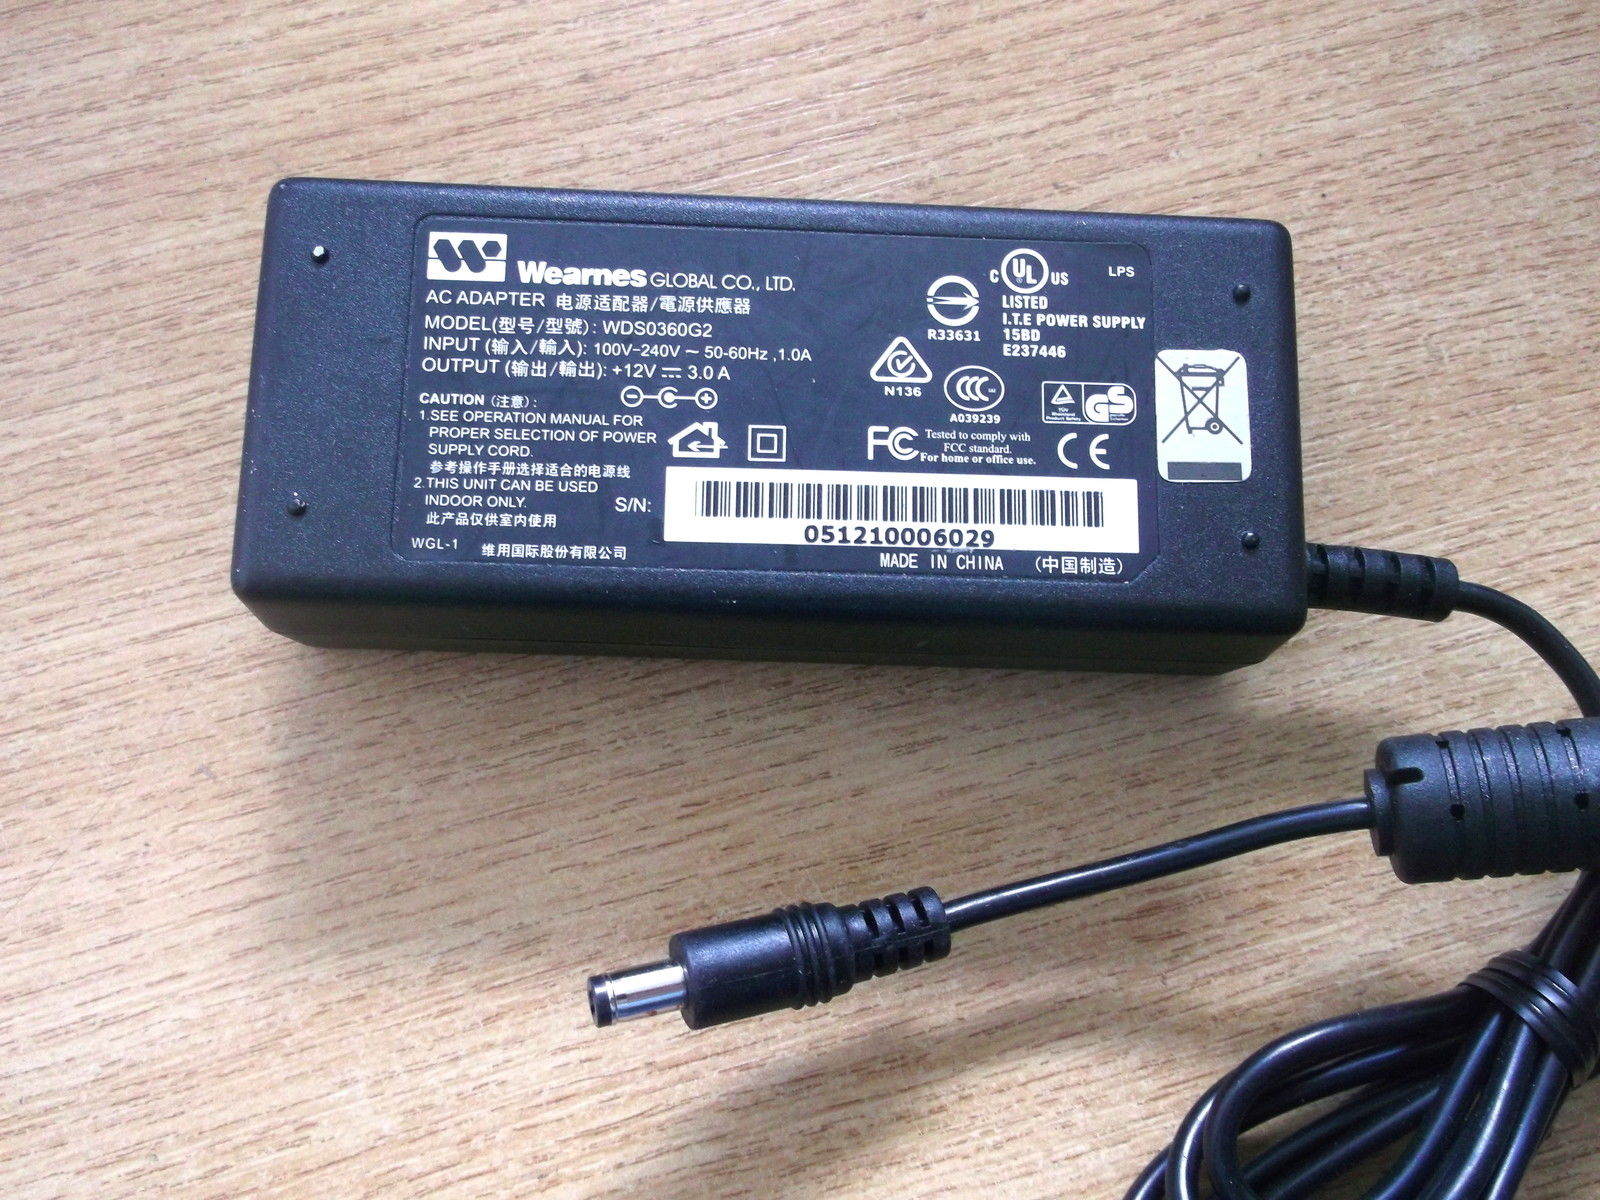 NEW 12V 3A WEARNES WDS0360G2 LCD TV POWER SUPPLY AC ADAPTER